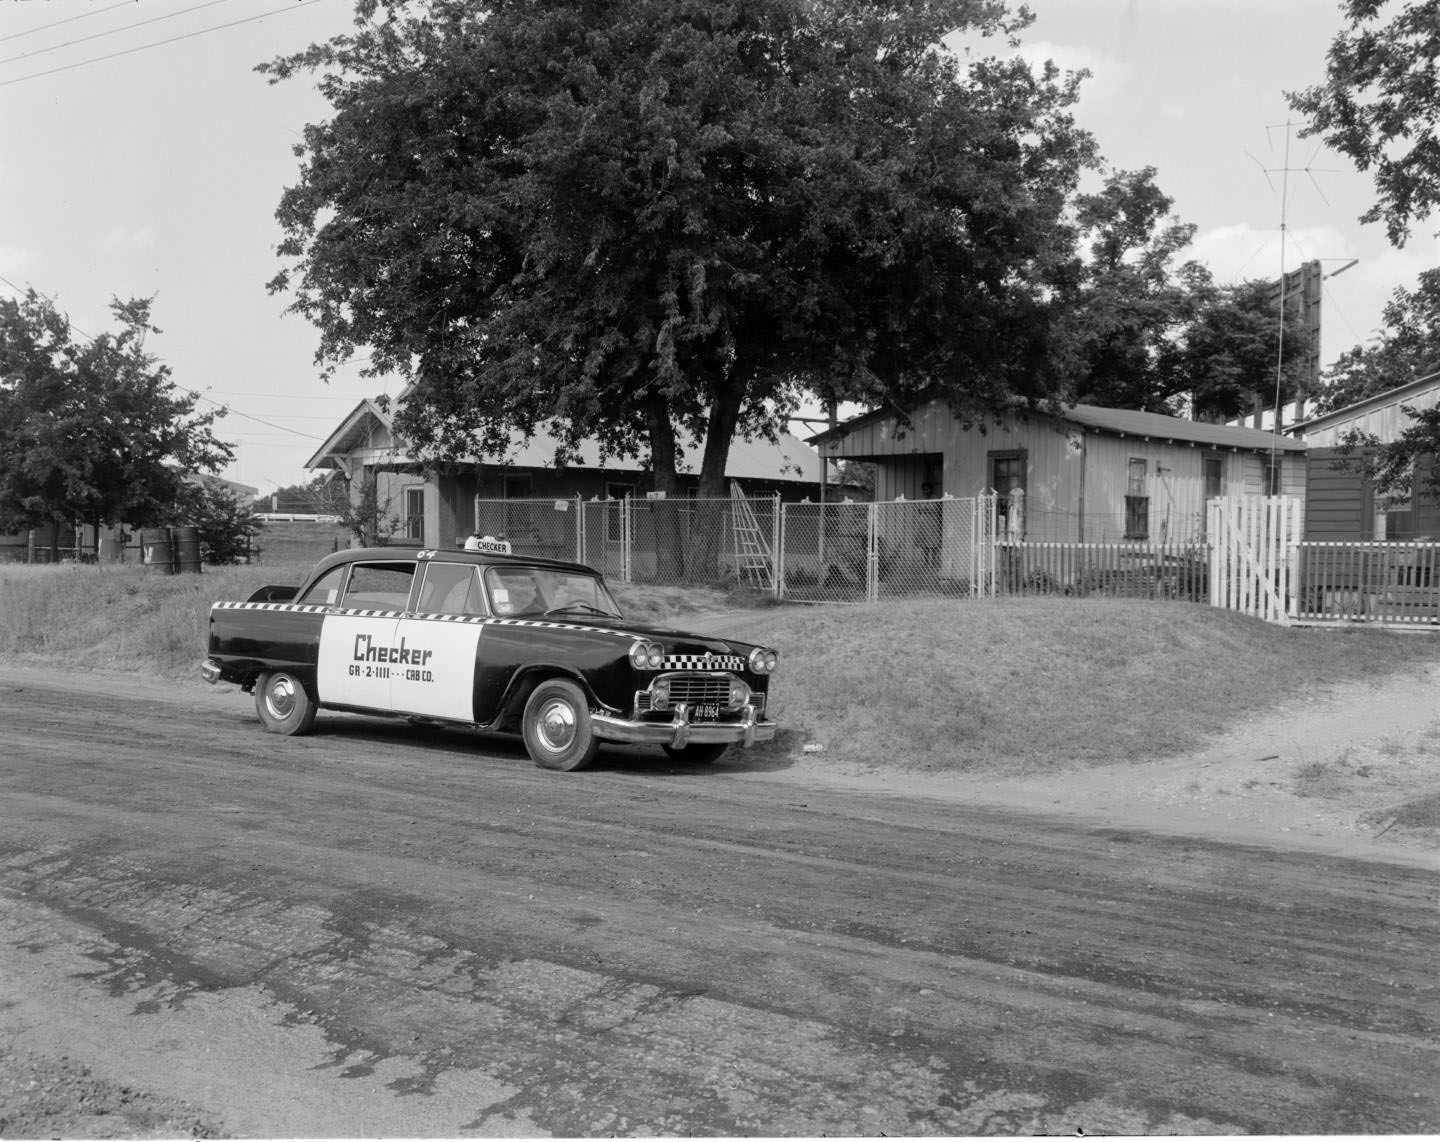 Checker cab parked on a residential street, Austin, 1962